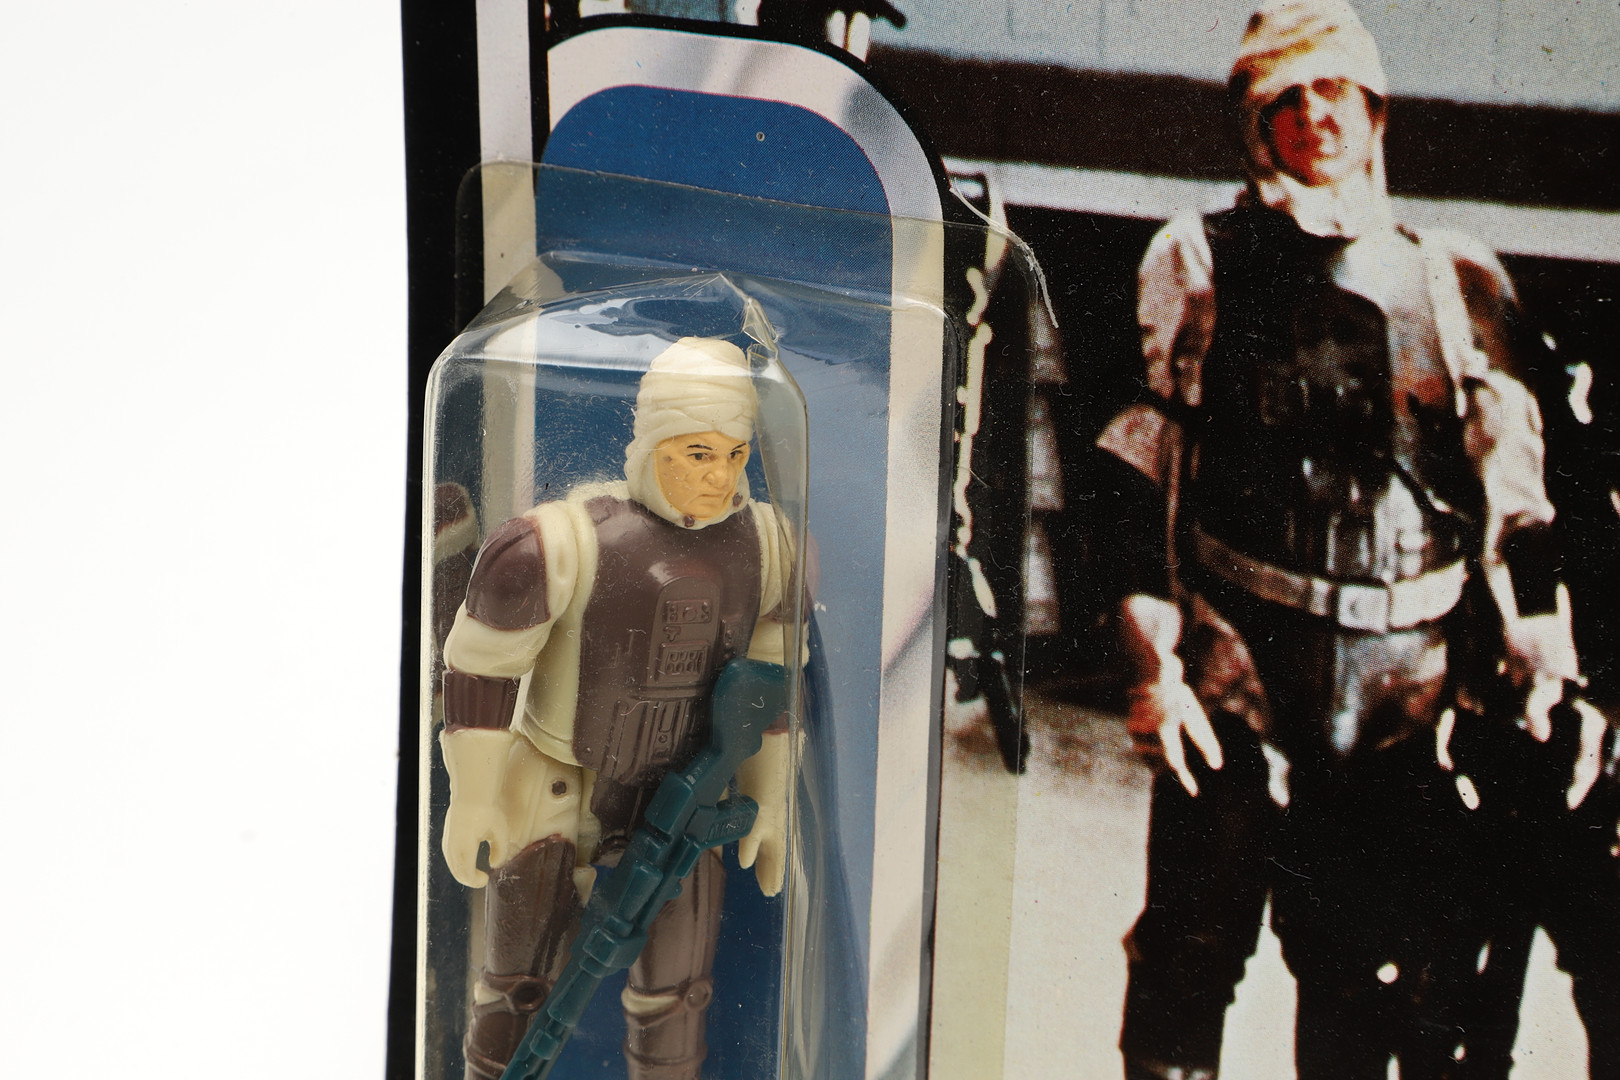 STAR WARS CARDED FIGURES - RETURN OF THE JEDI. - Image 8 of 32